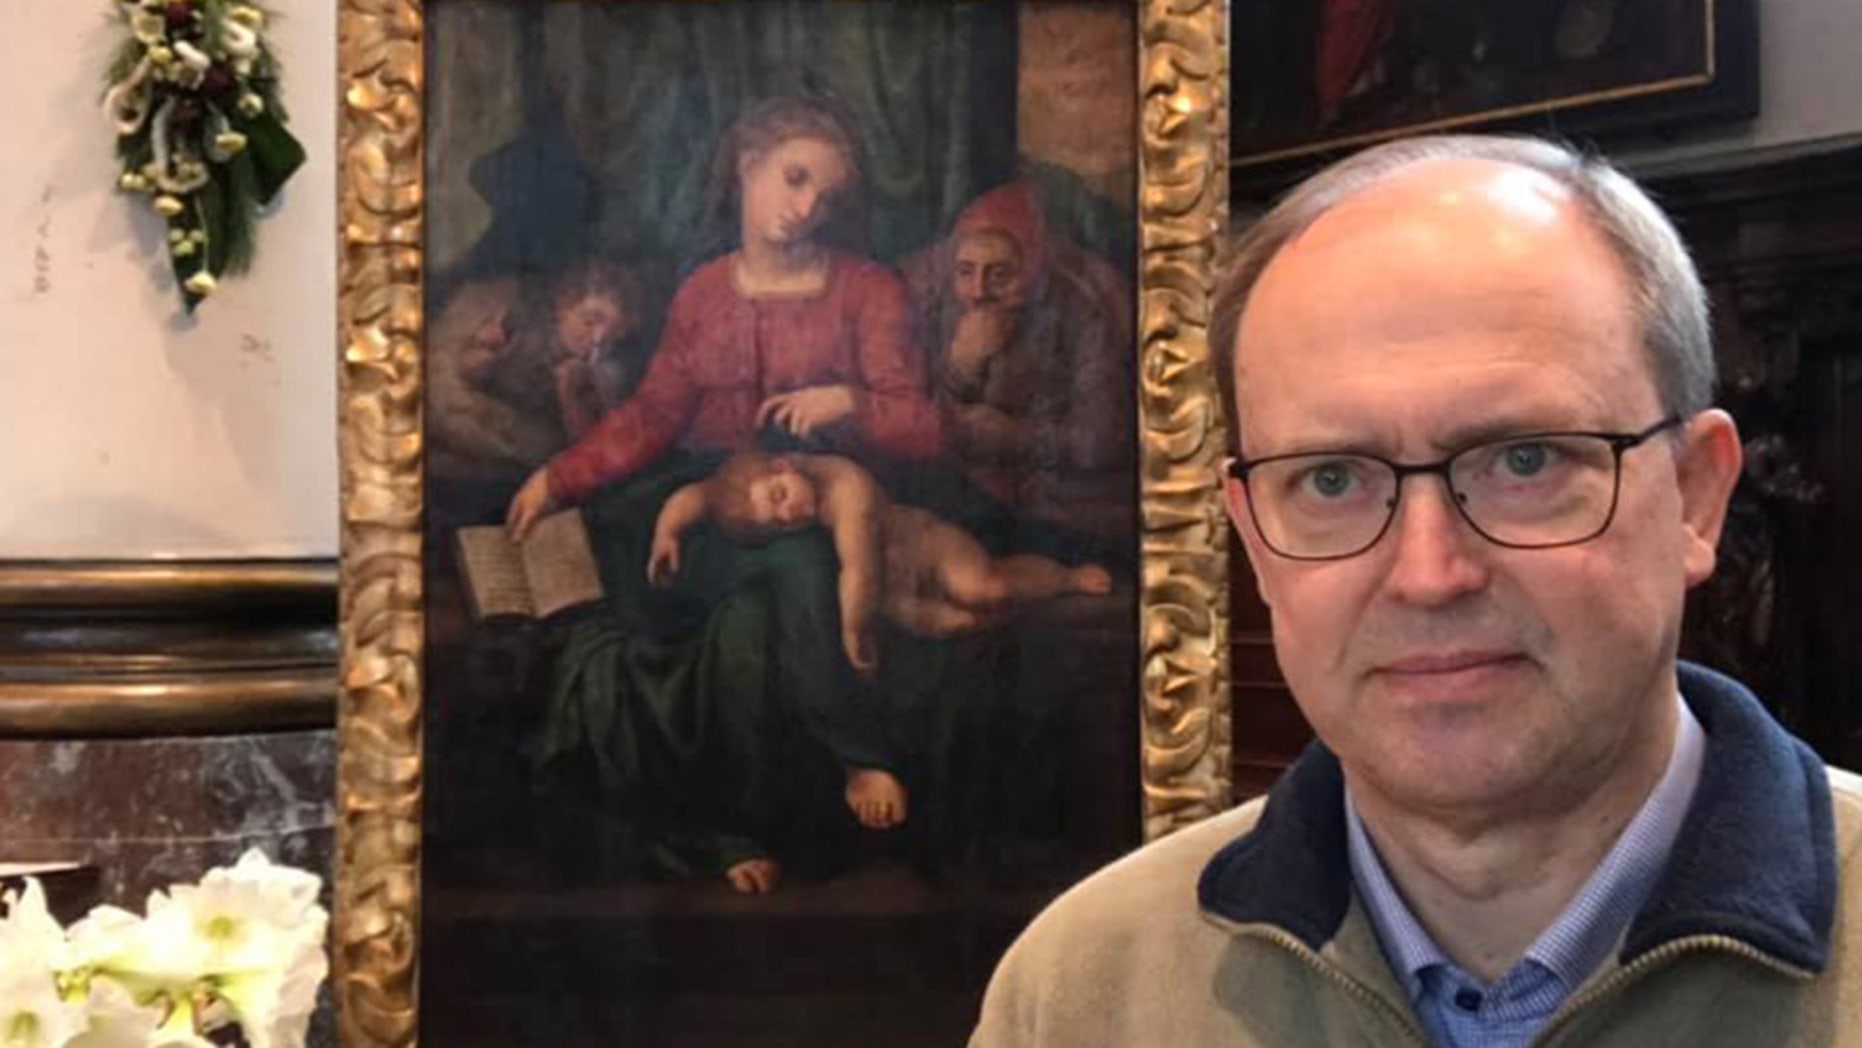 ‘Michelangelo’ painting stolen from Belgian church days before experts were to authenticate it